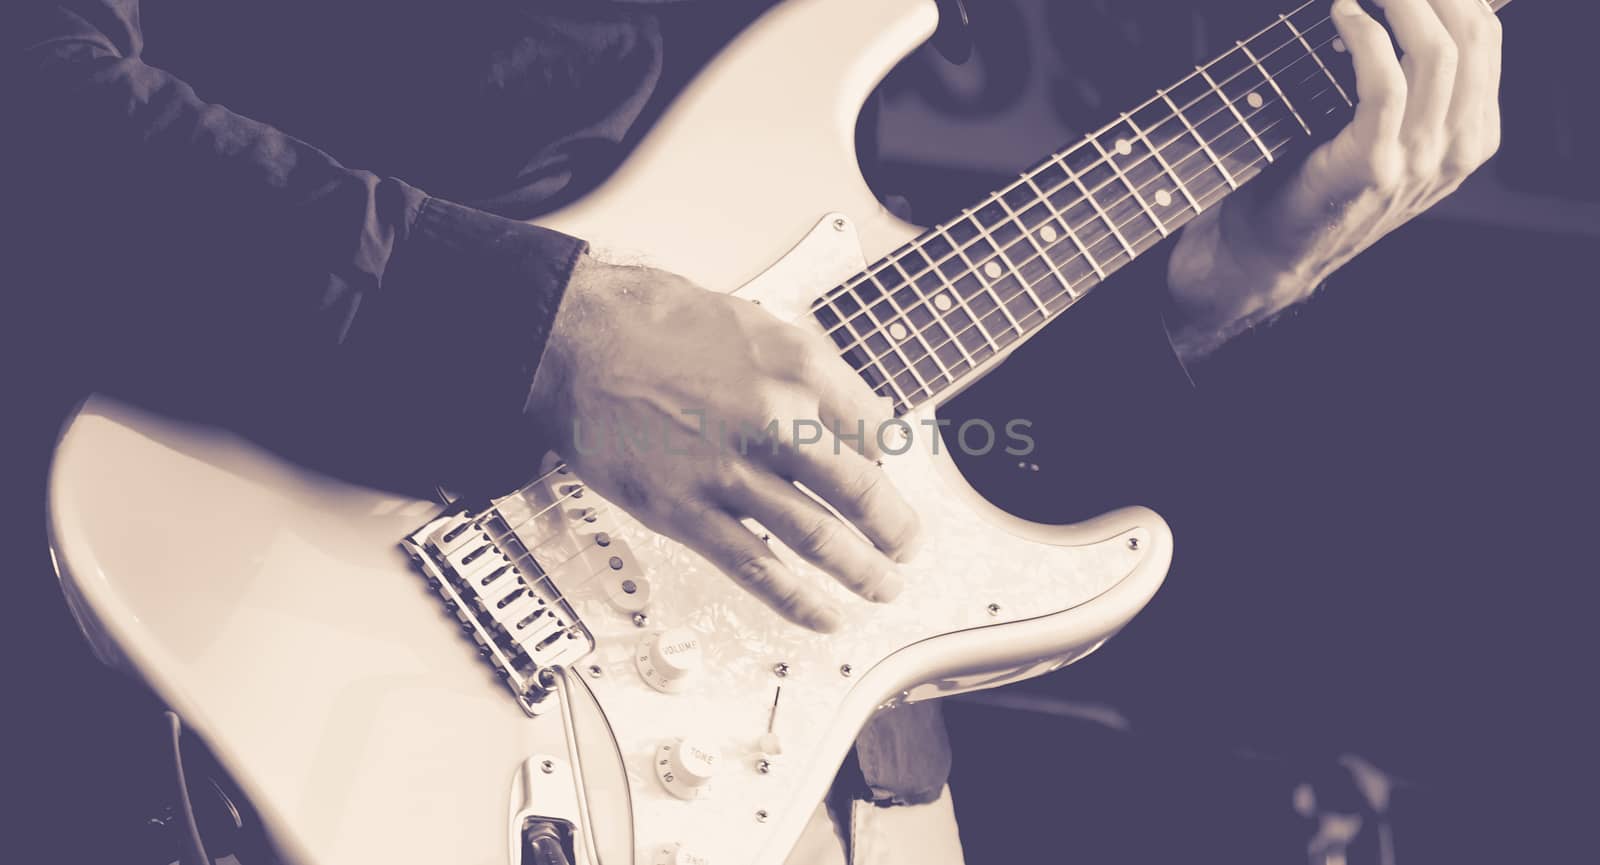 Close up of hands of a man playing a electric guitar. black and white image